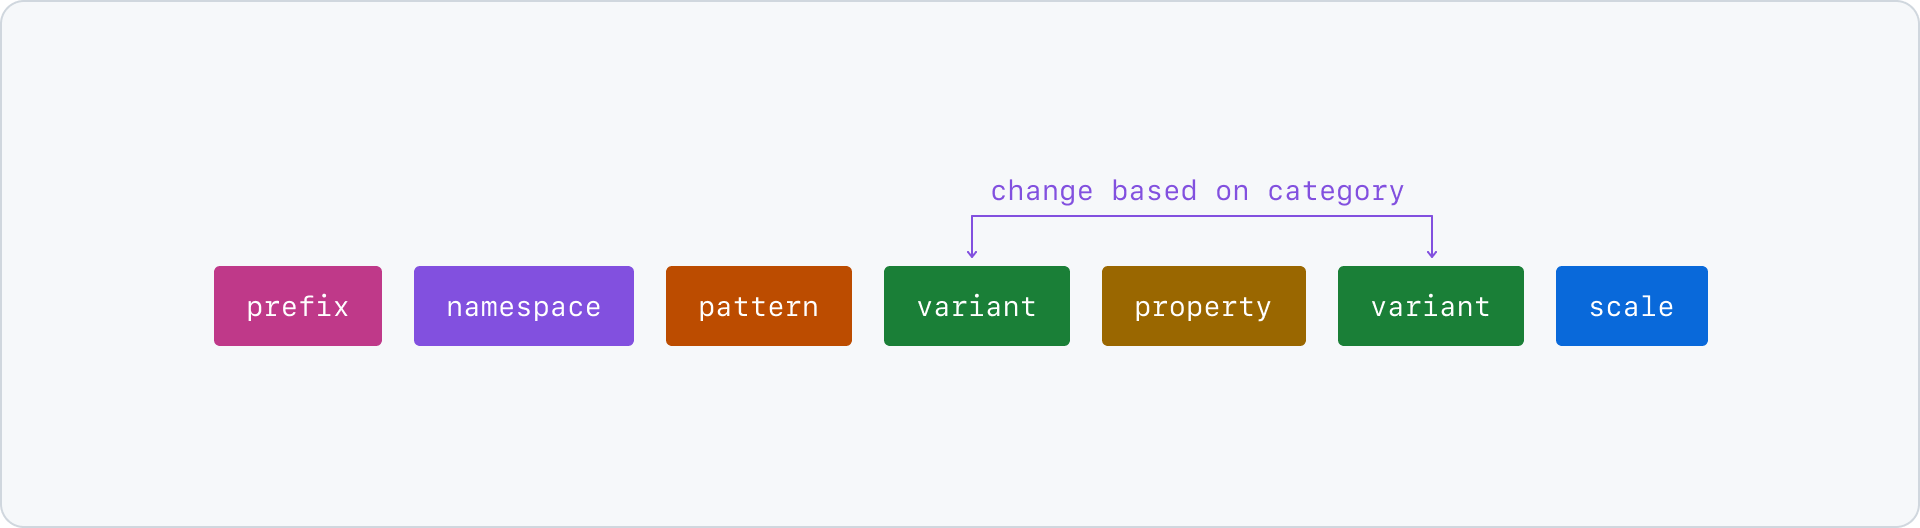 graphic listing out prefix, namespace, pattern, variant, property, variant, and scale all color coded to match help illustrate the differences between them